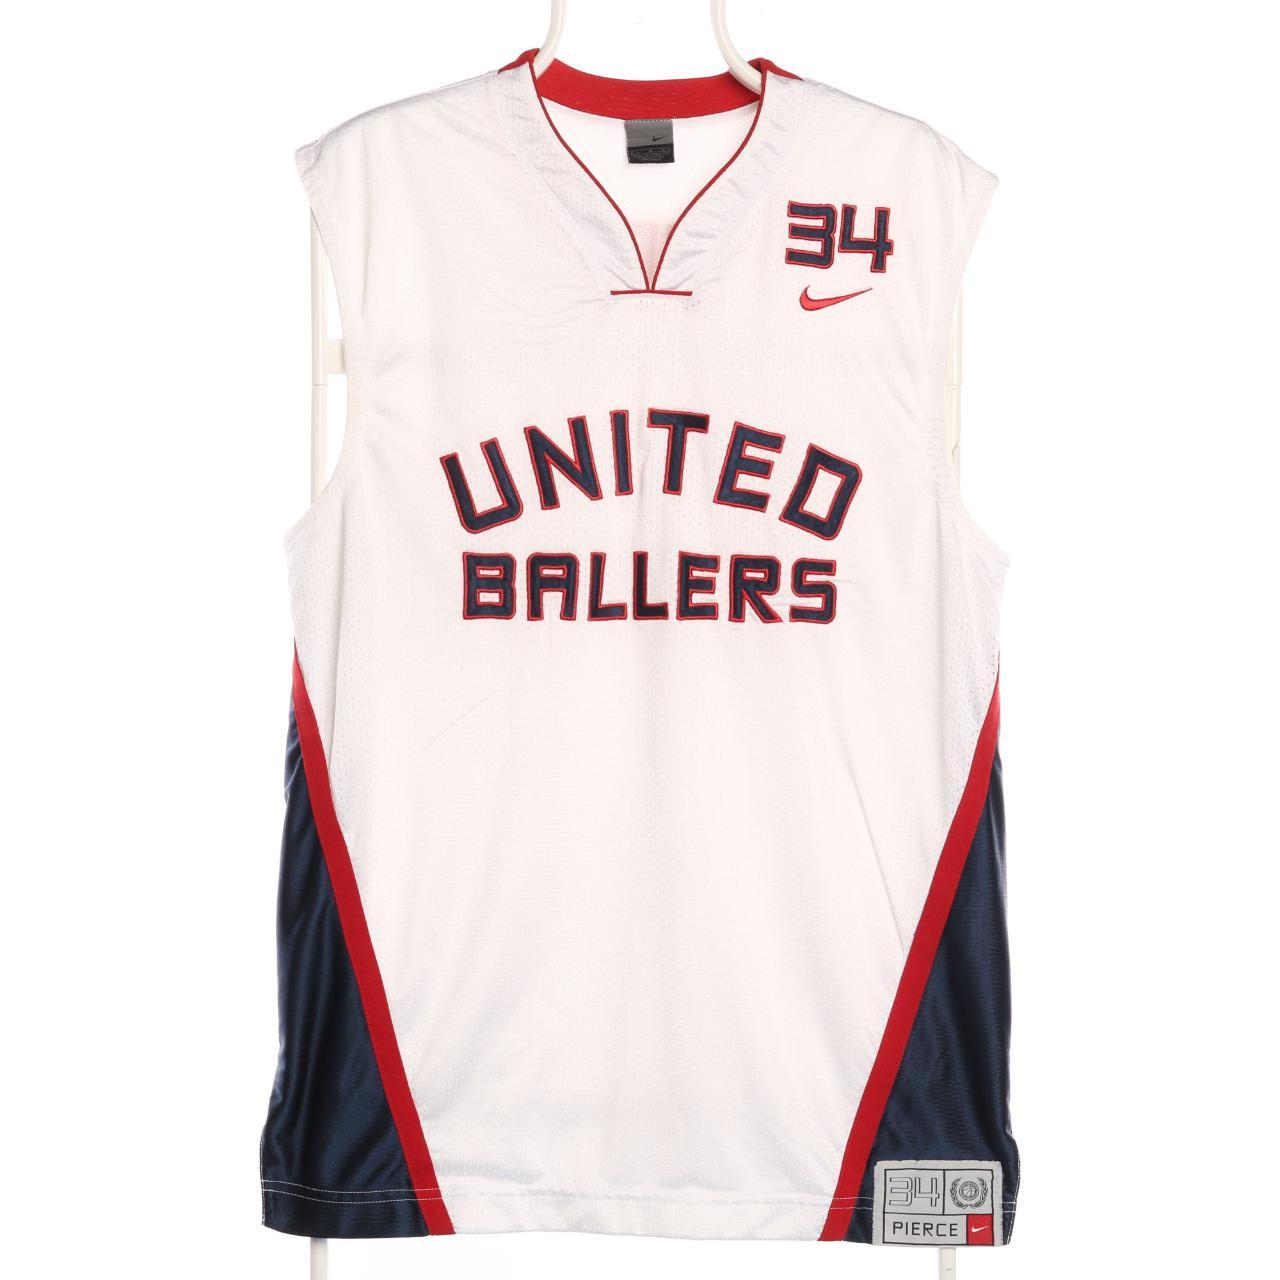 Product Image 1 - Vintage Nike Jersey

Nike 90's Jersey
Embroidered